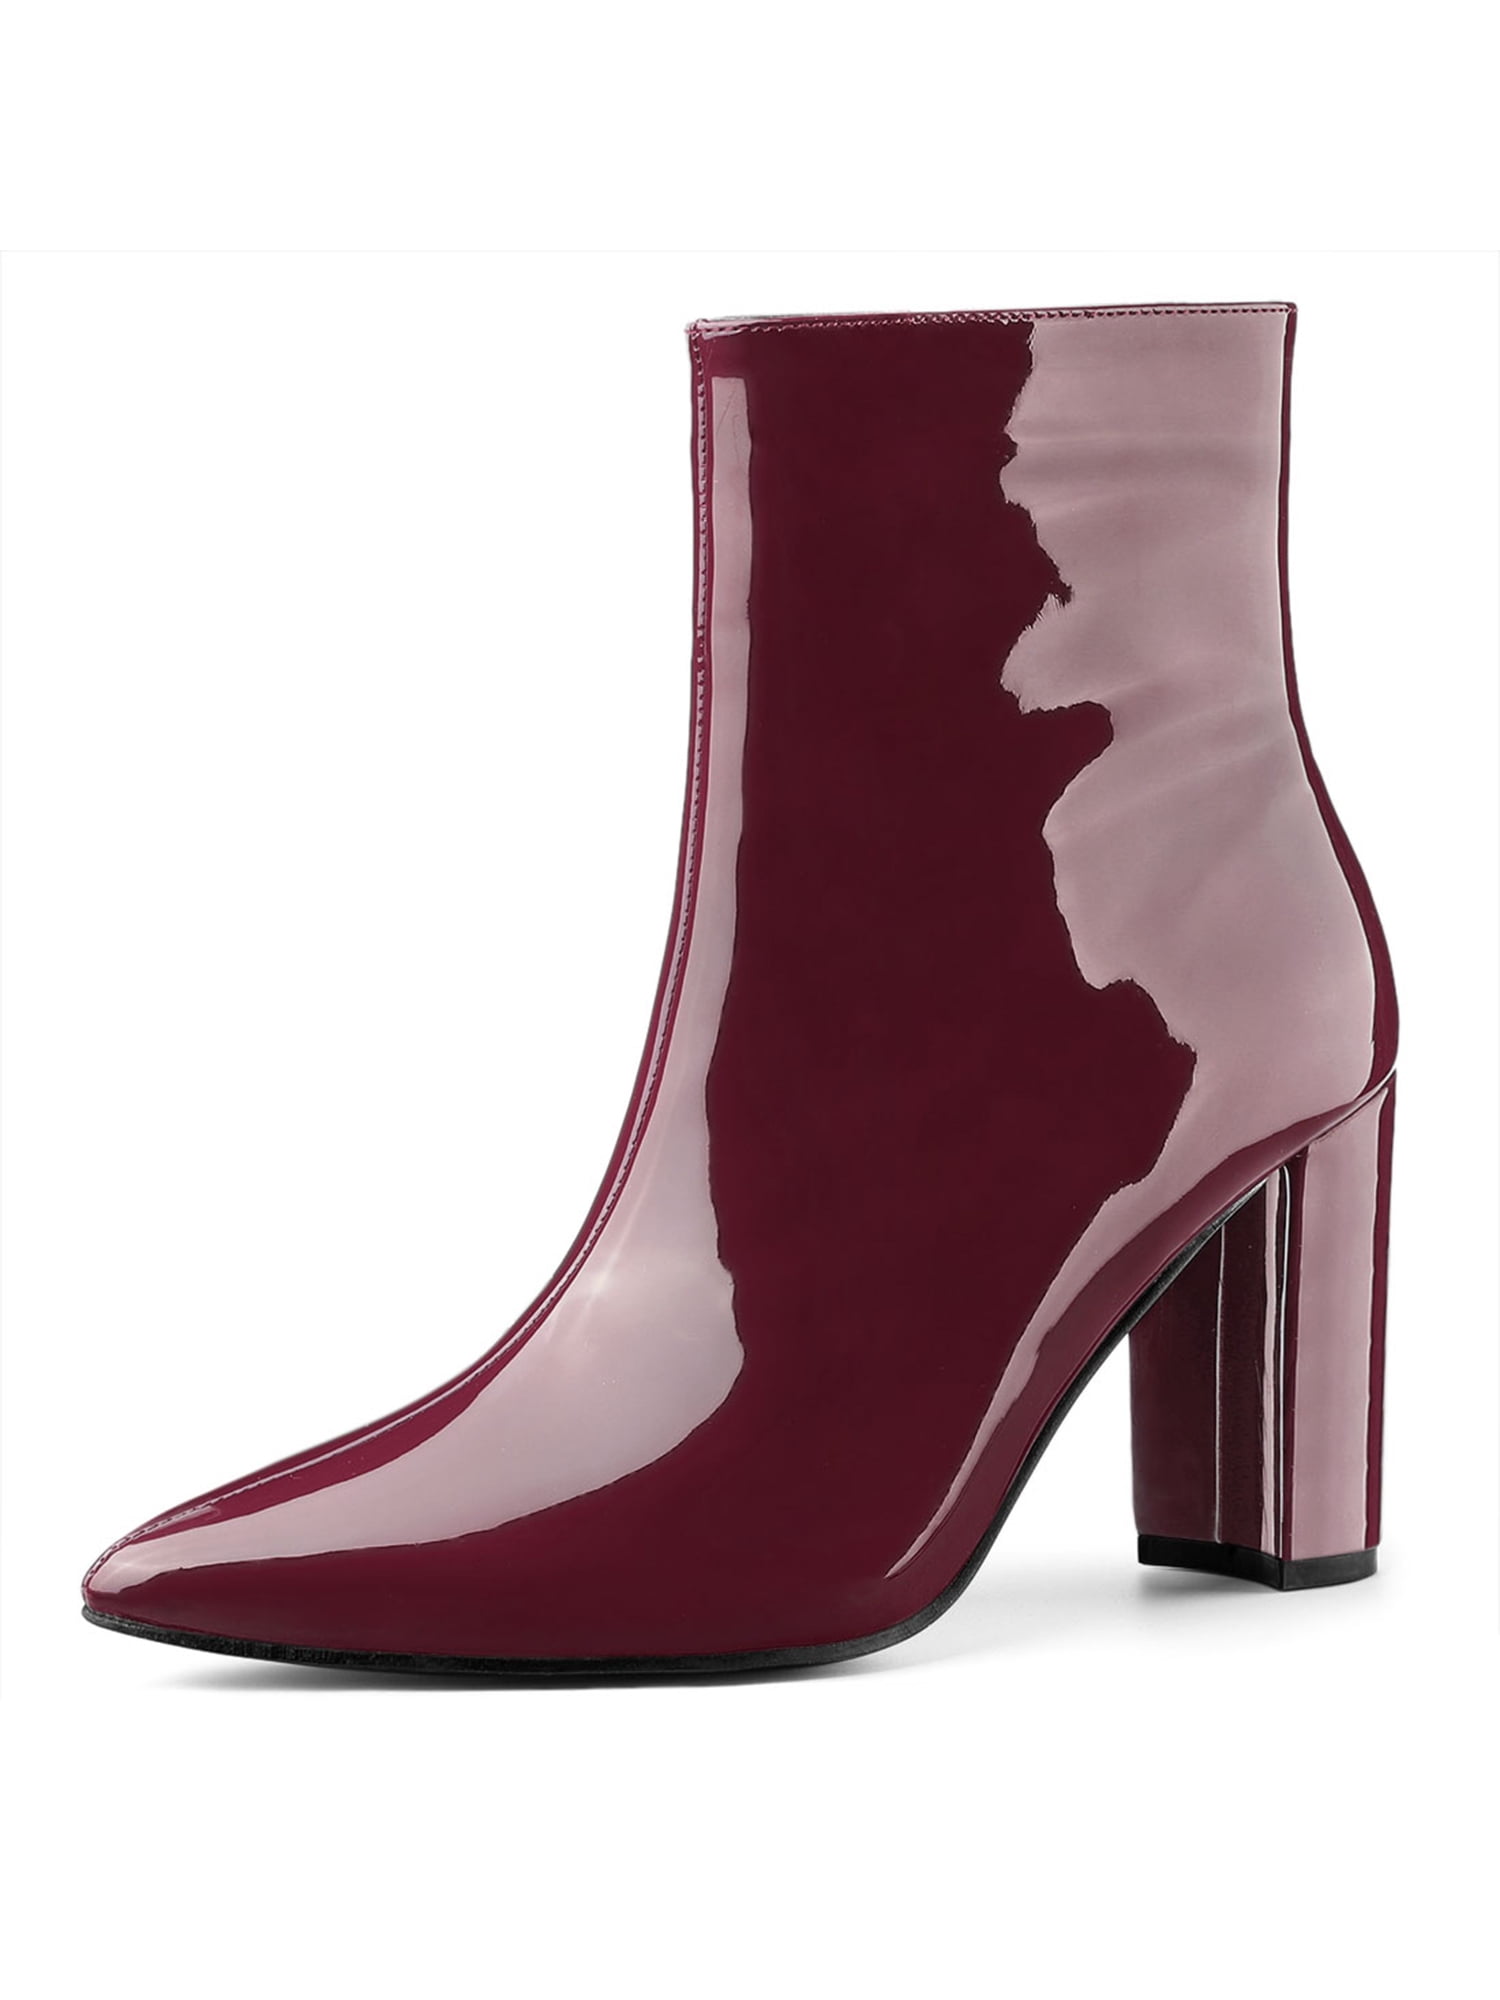 Details about   Women's Pointy Toe Patent Leather Over Knee High Boots Block Heels Party Shoes